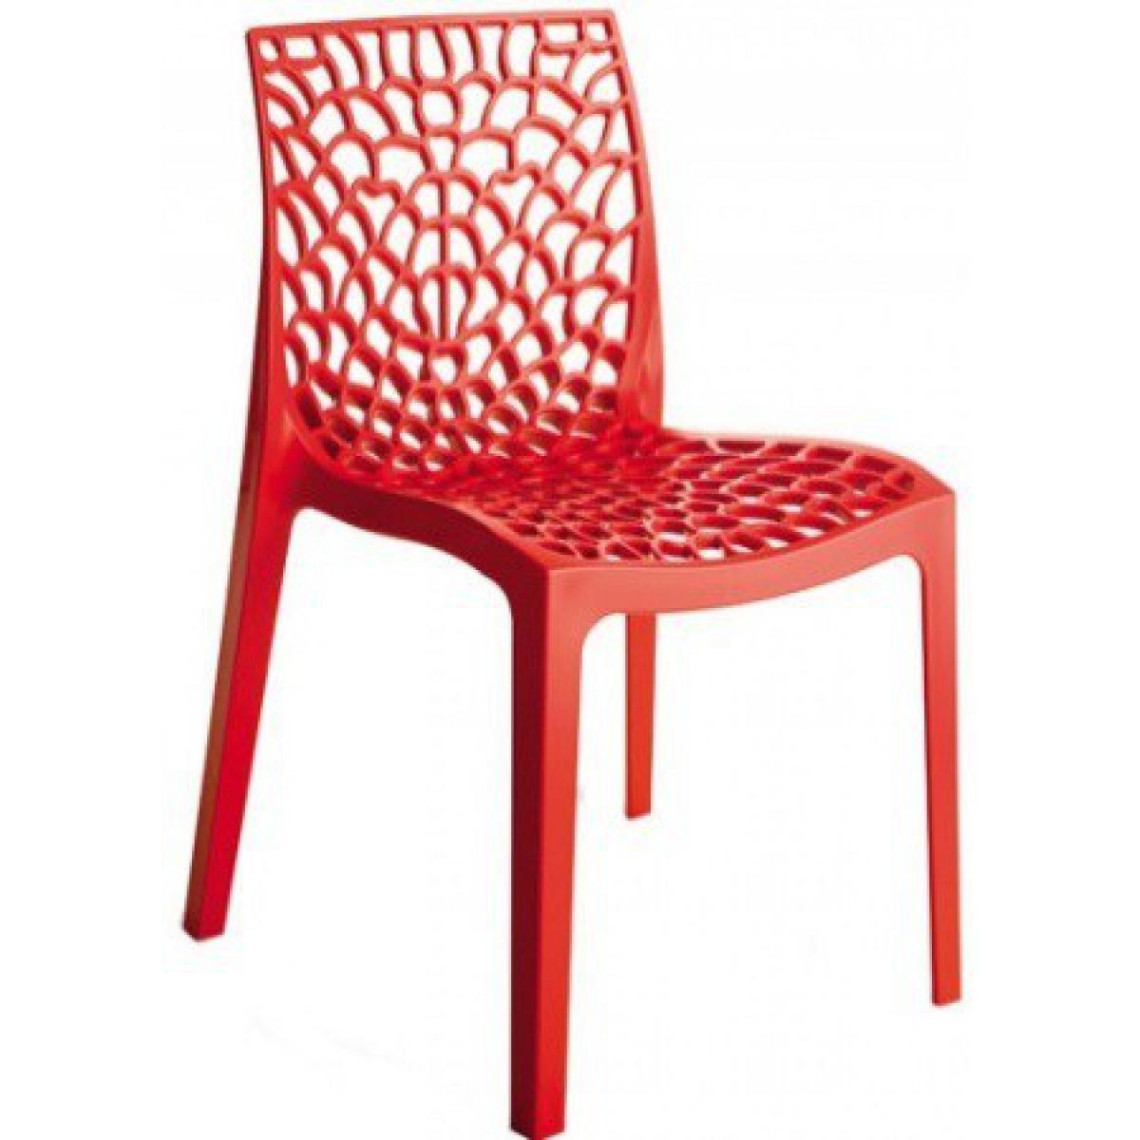 3S. x Home Chaise Design Rouge GRUYER